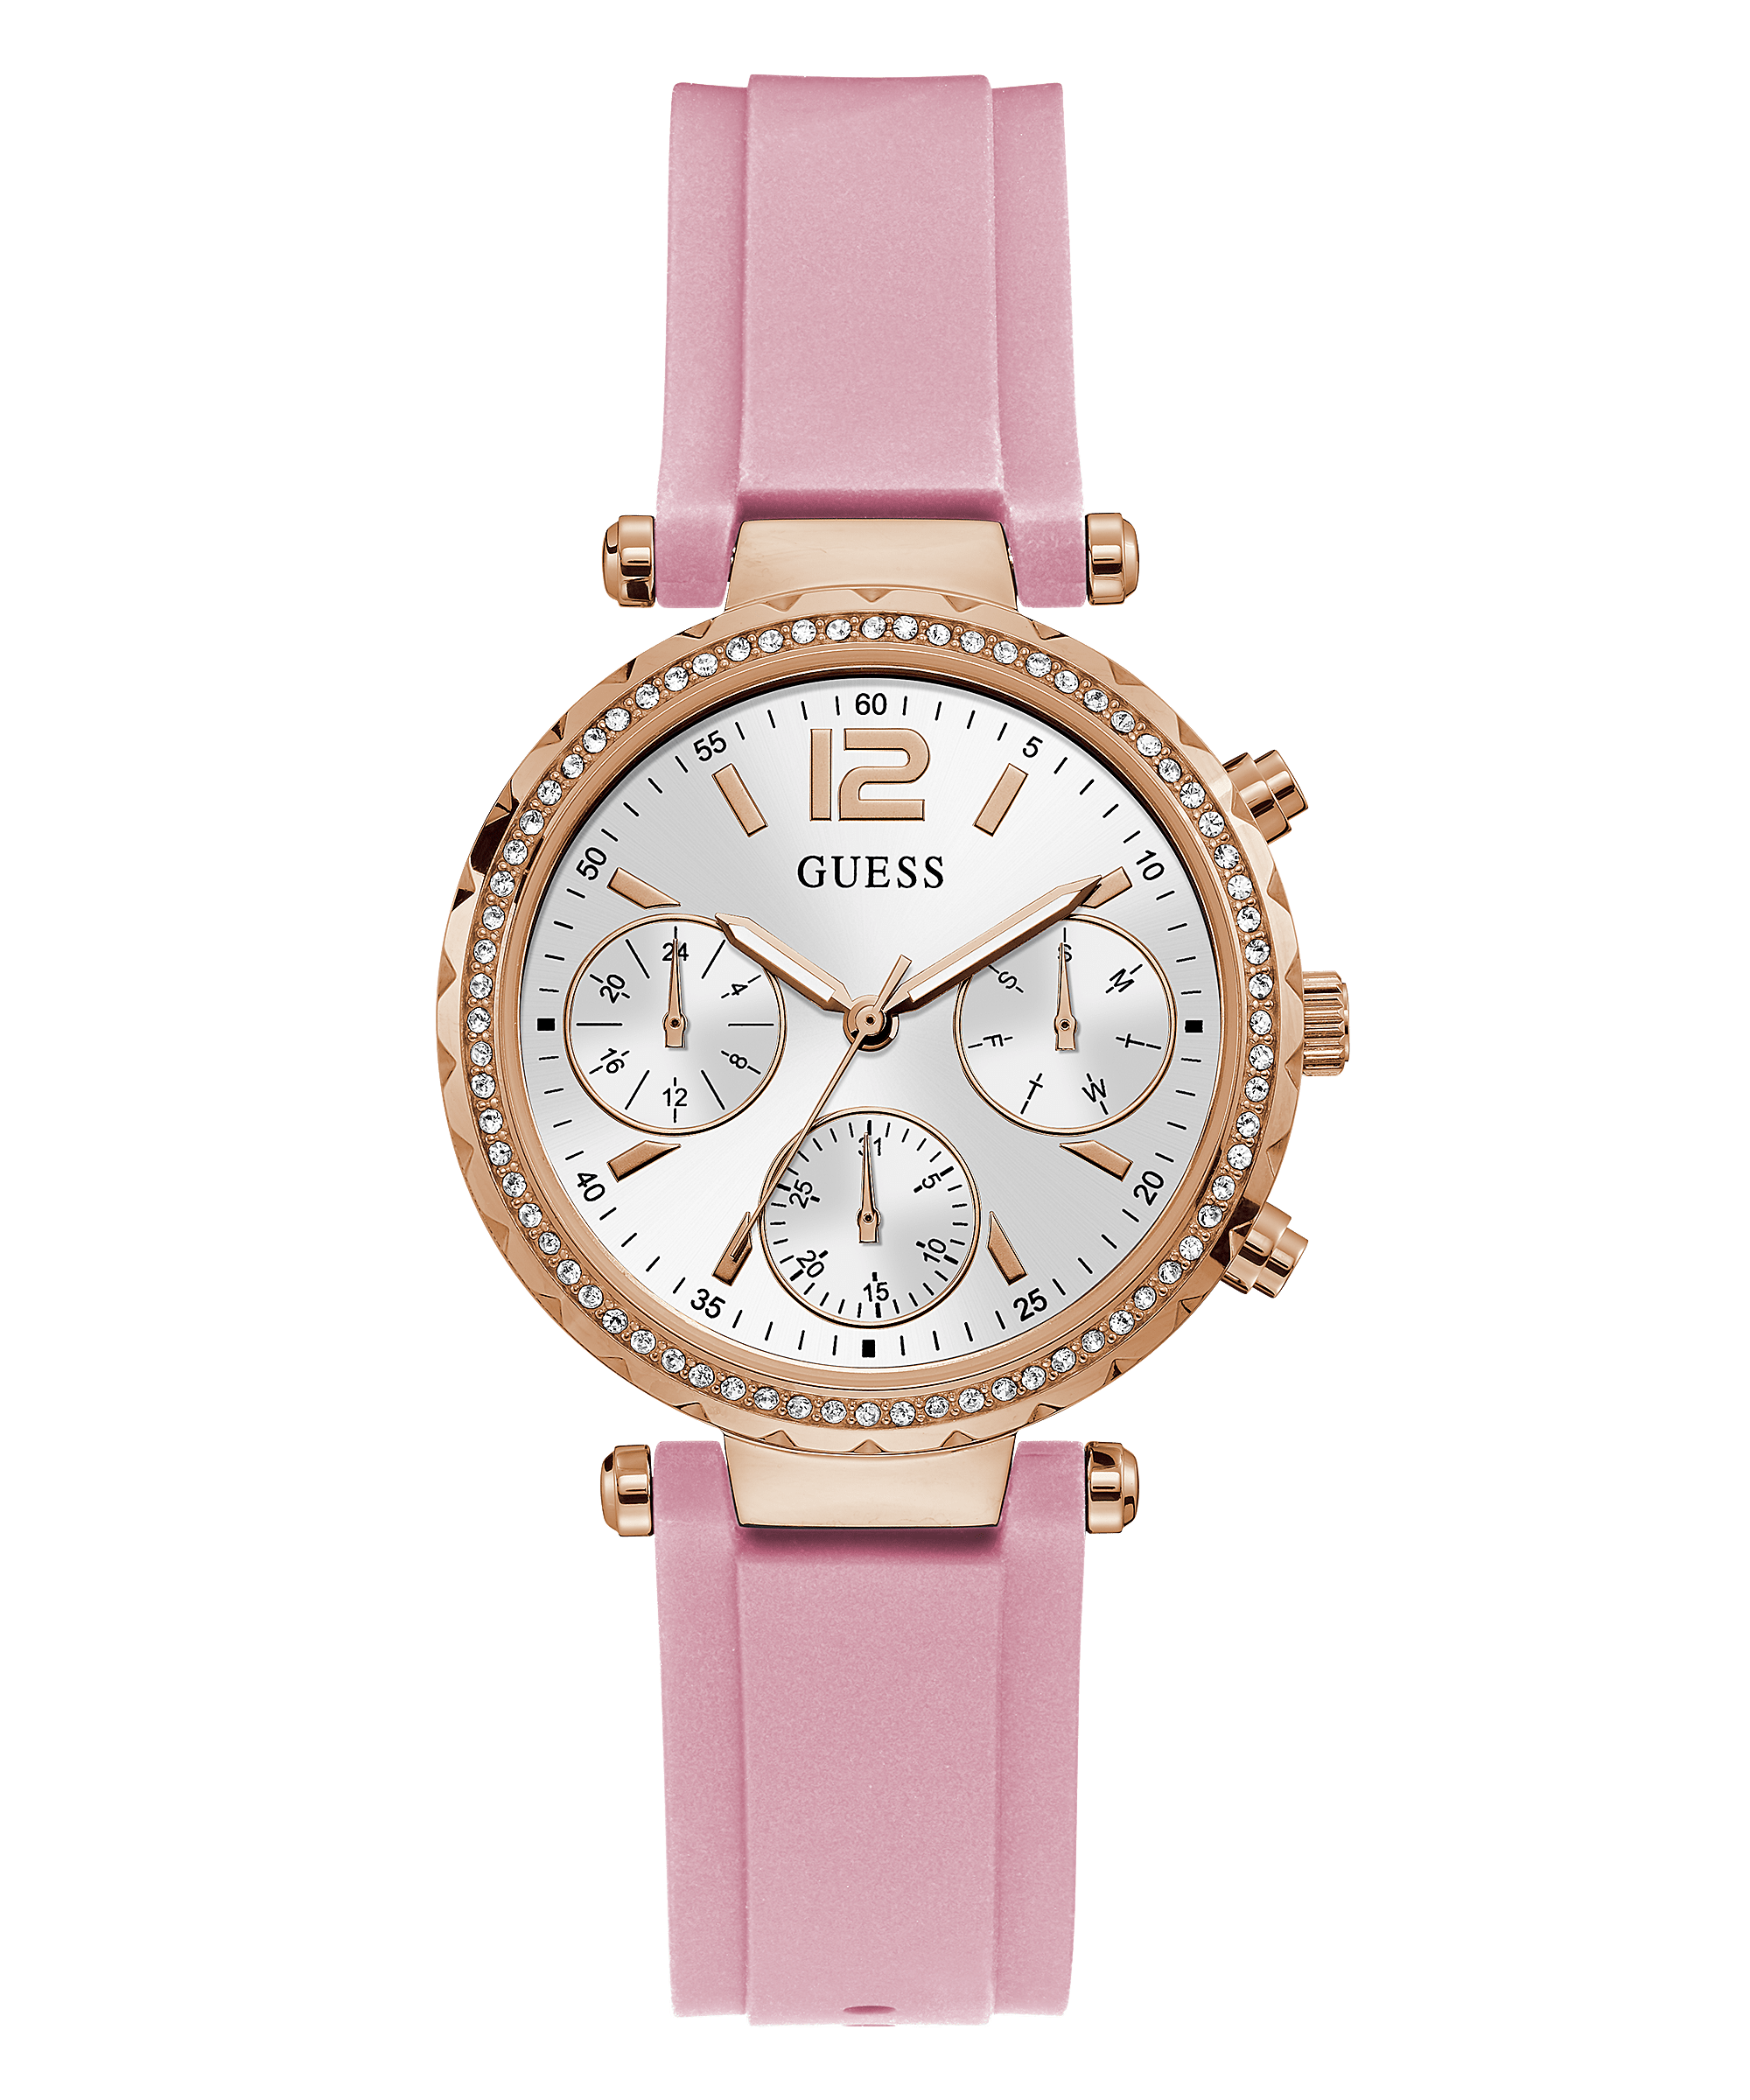 angreb Tarmfunktion Antagelser, antagelser. Gætte Rose Gold Tone Case Pink Silicone Watch - GUESS Watches